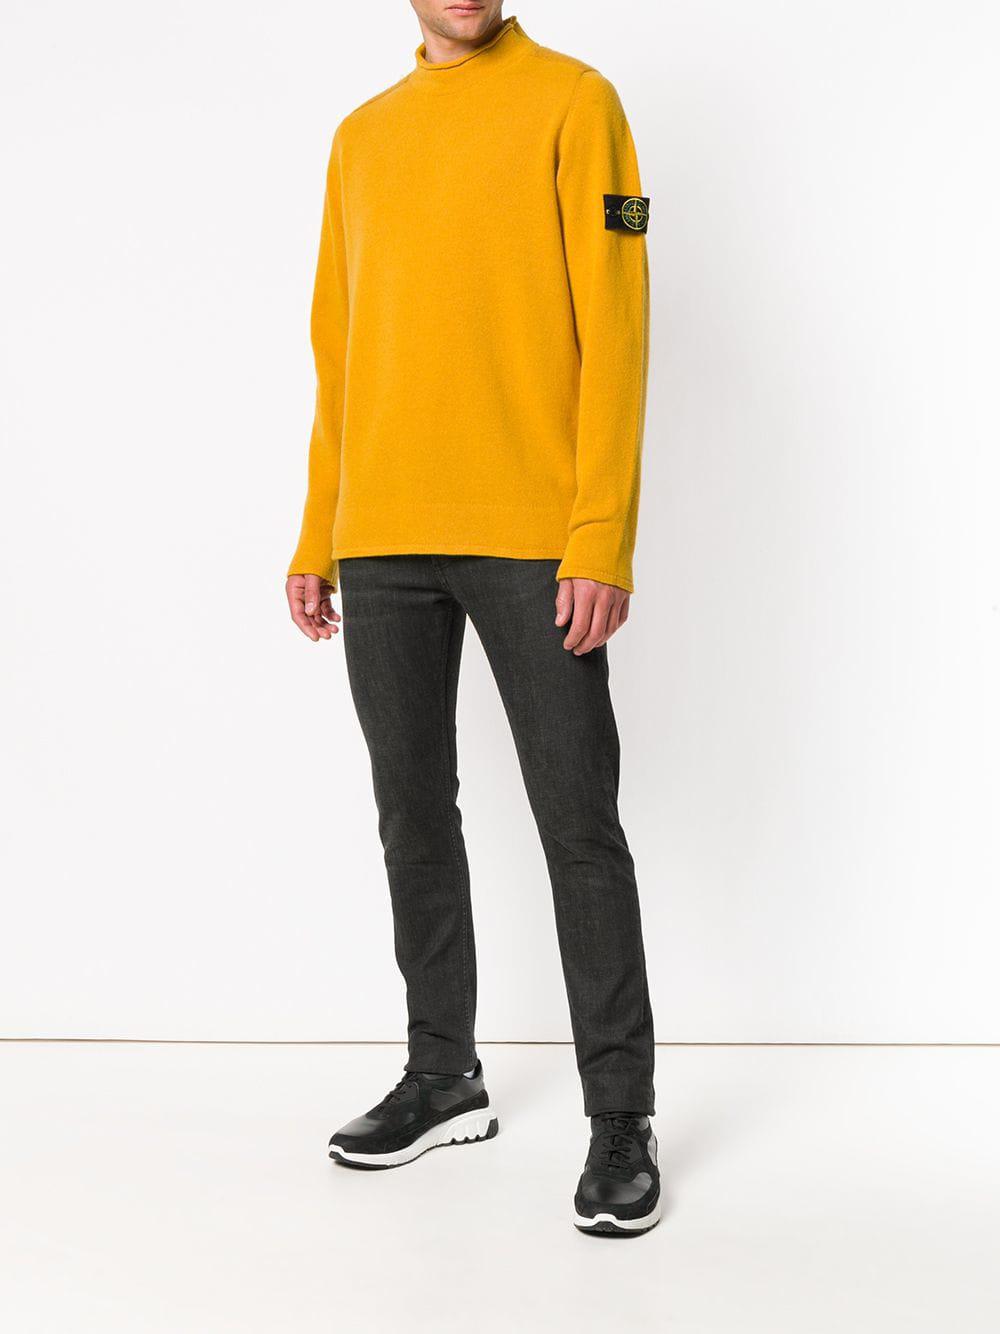 Stone Island Rolled Edge Turtleneck Sweater in Yellow for Men - Lyst